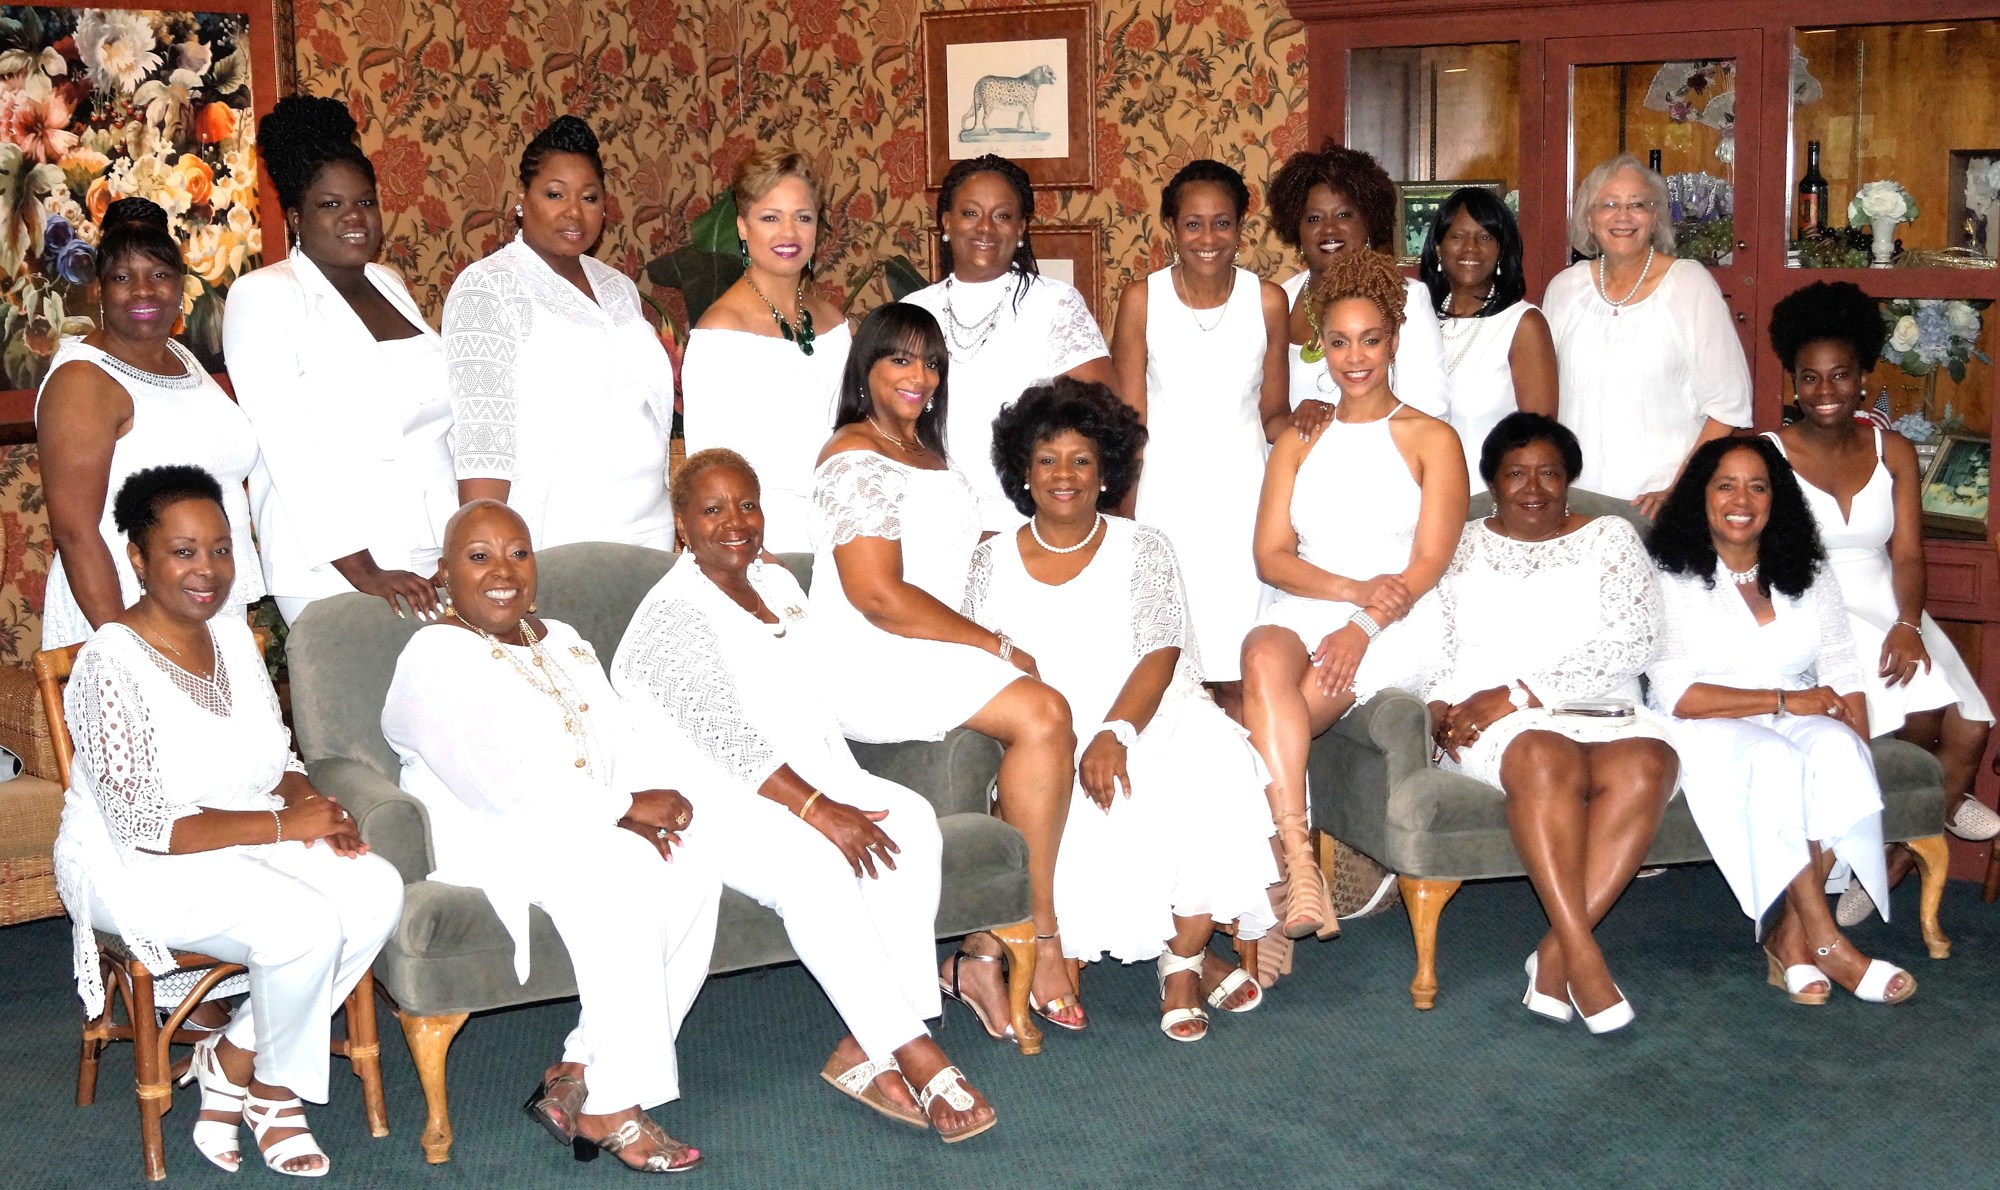 Members of the Chi Delta Omega Chapter of Alpha Kappa Alpha Sorority, Inc. celebrated its 15th anniversary with a white party. Photo courtesy of Myra Middleton-Valentine